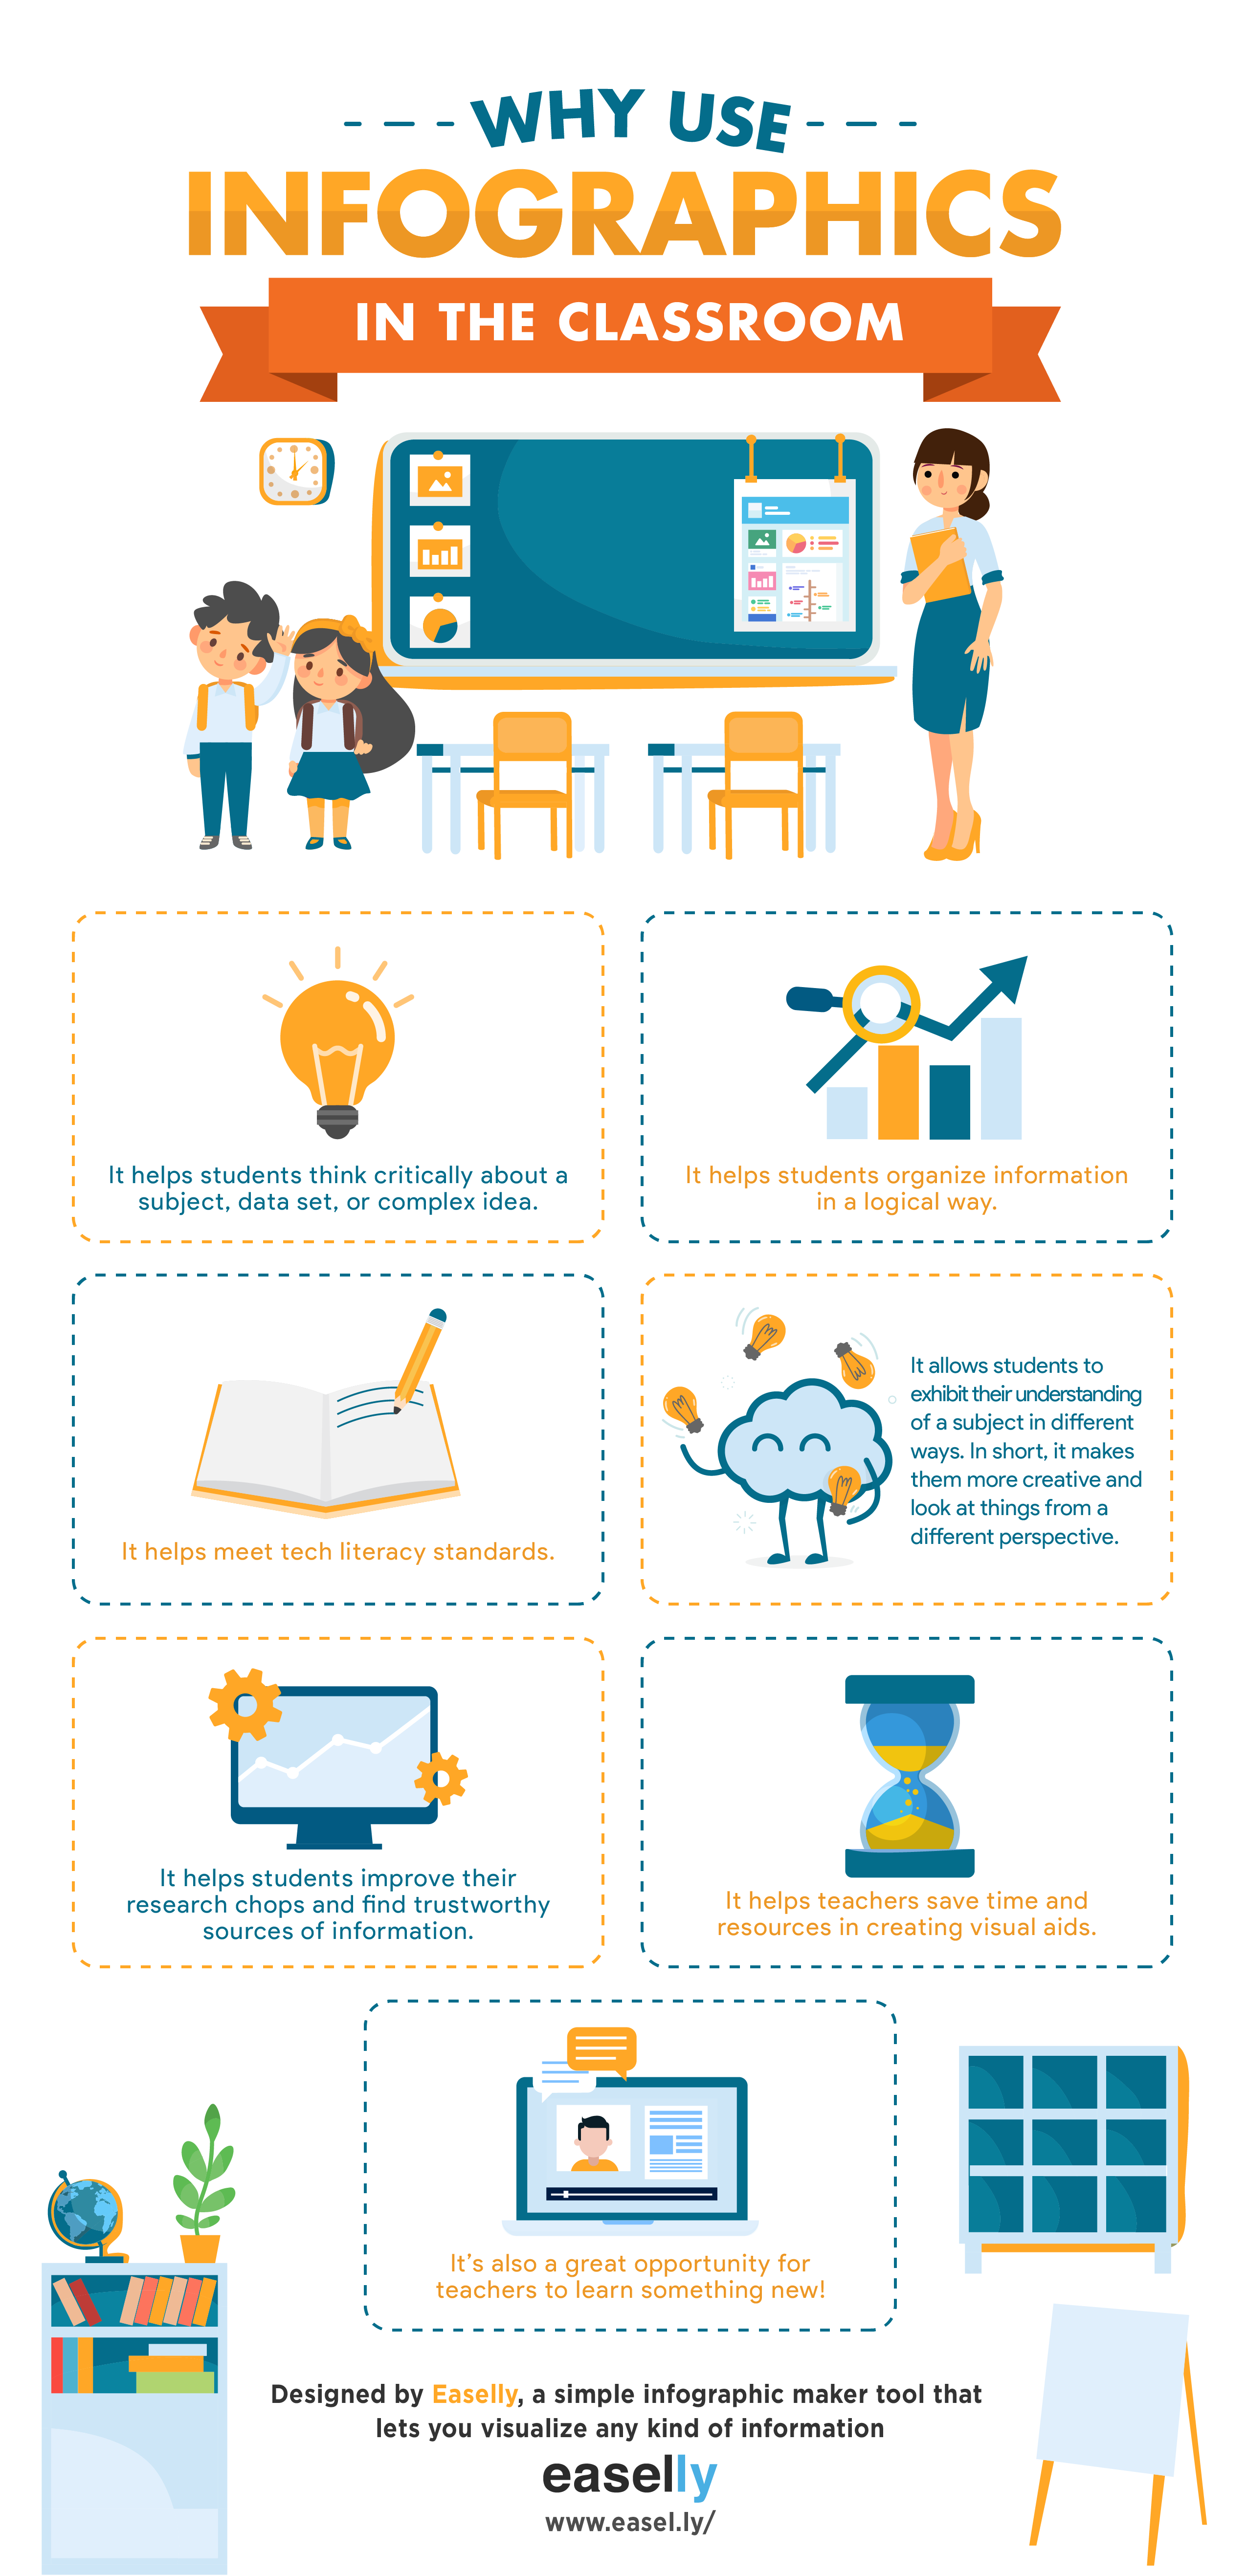 Why Use Infographics in the Classroom infographic